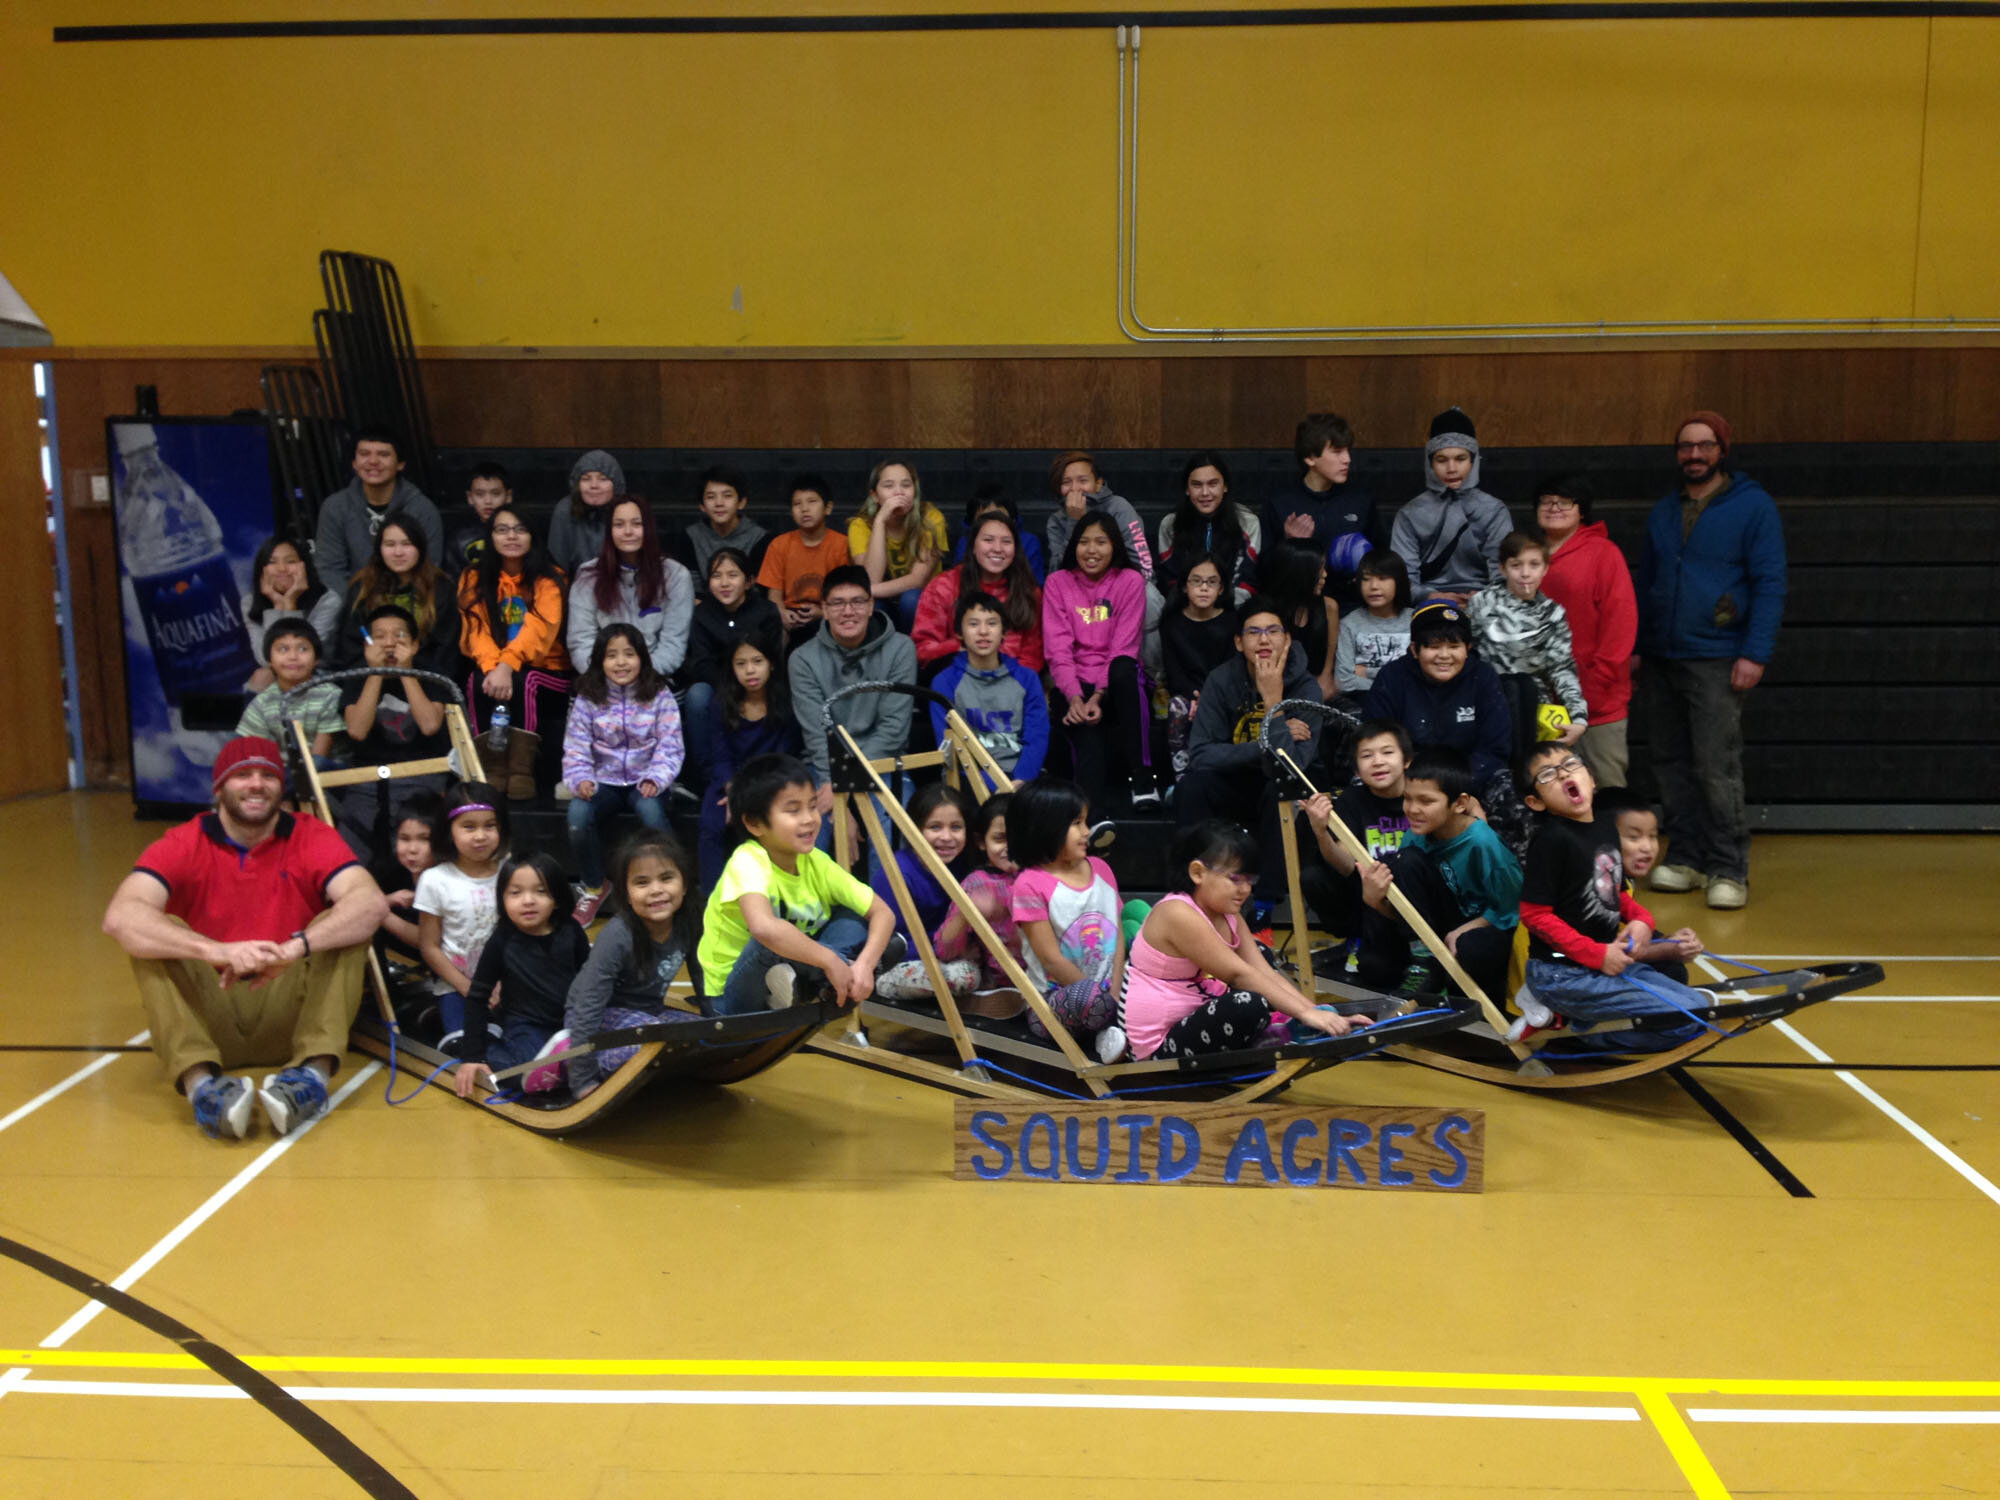 118.MINTO- Students pose with the 3 sleds they build photo by Vicki Charlie.jpg